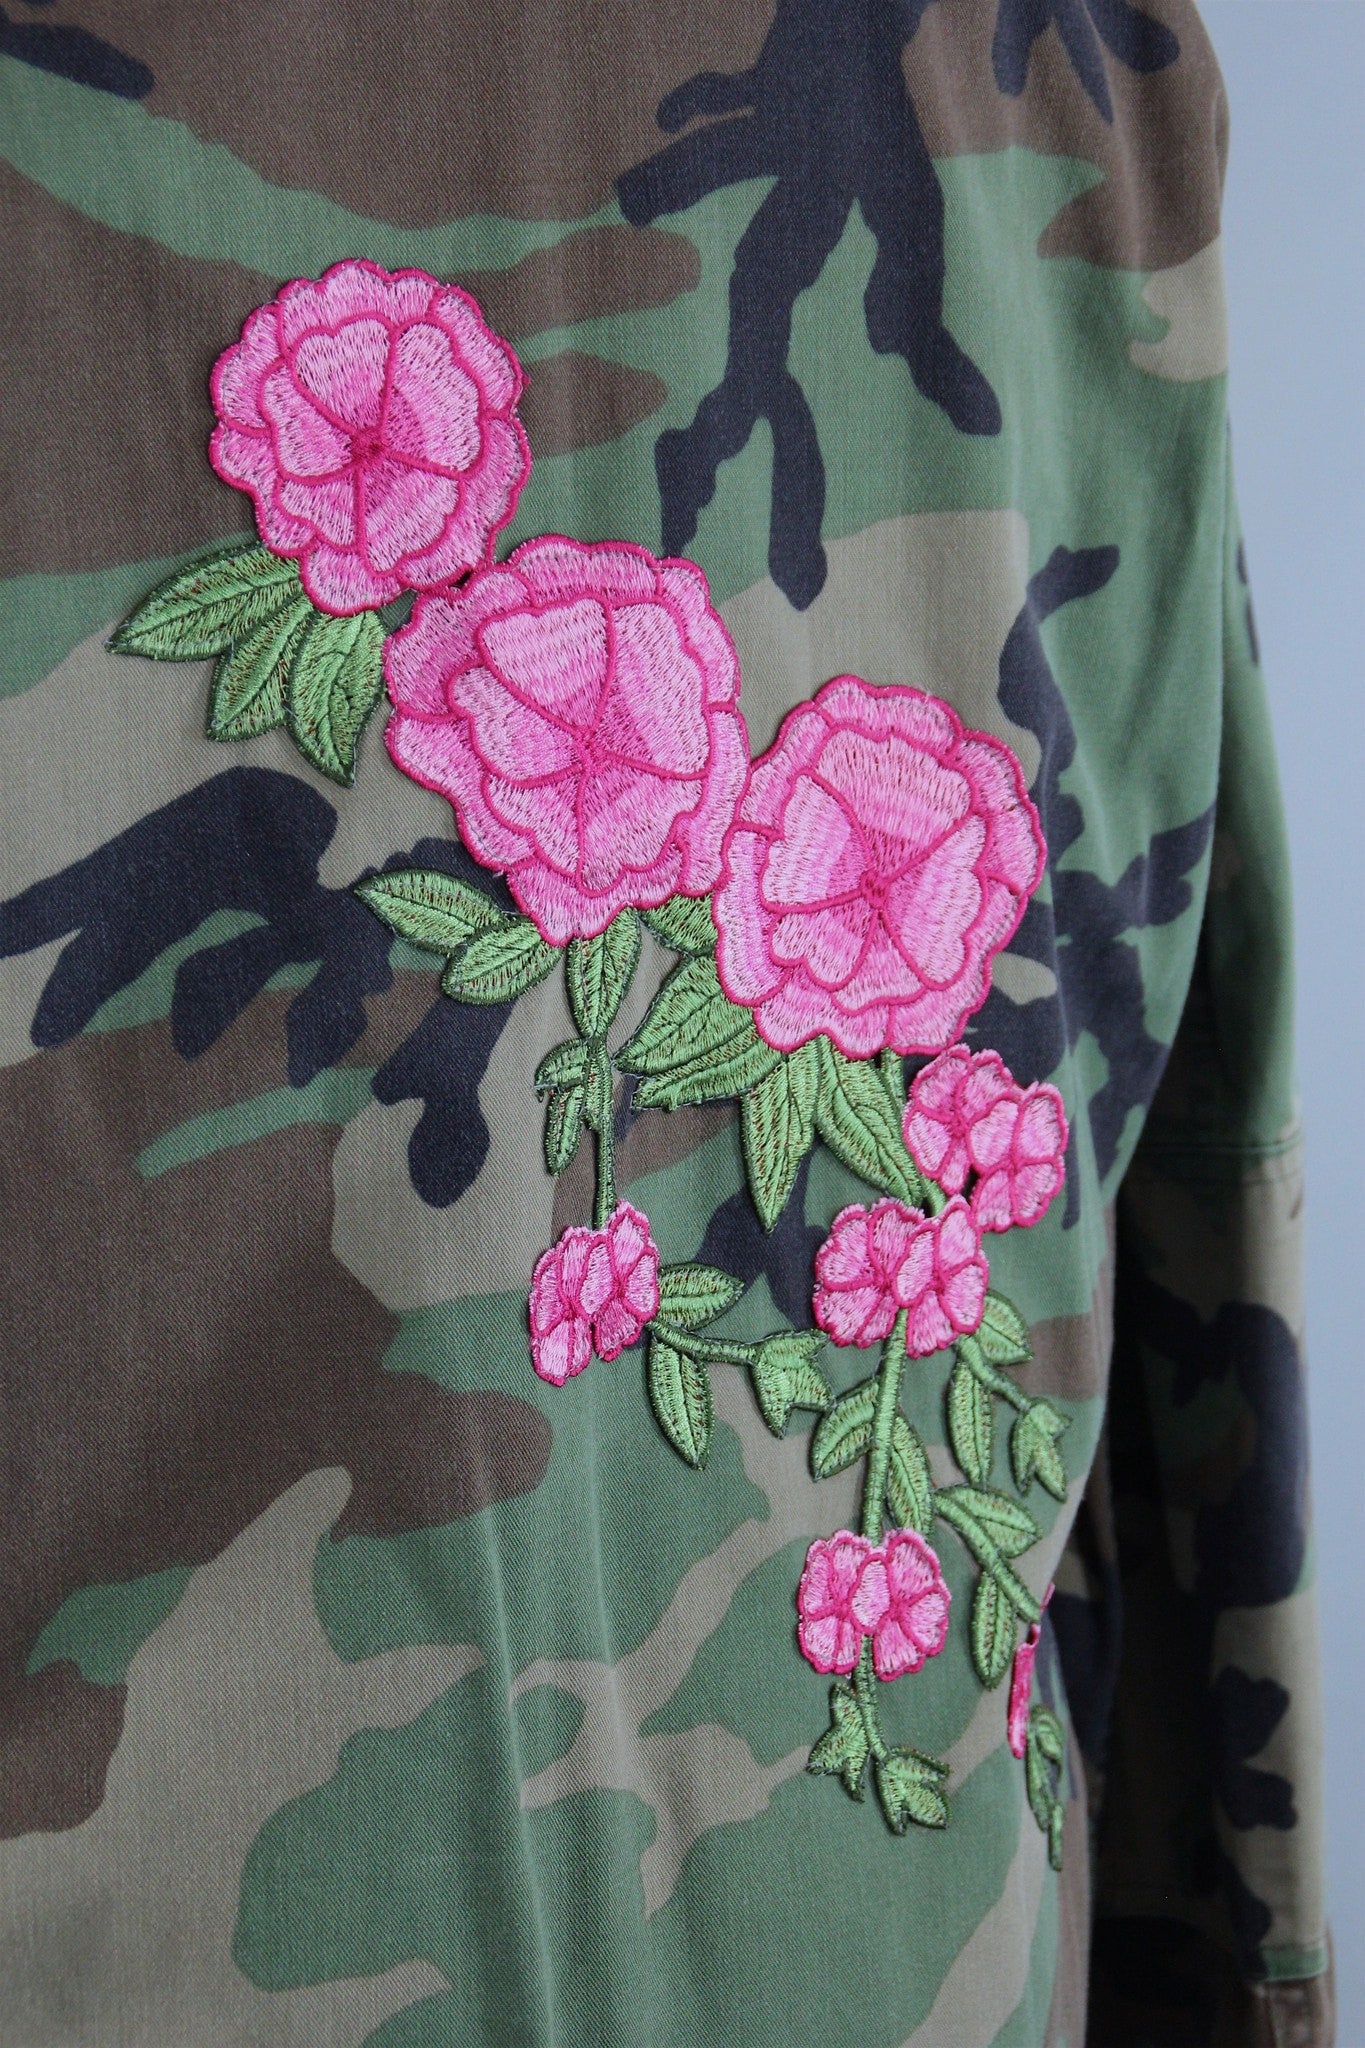 US Army Camouflage Jacket with Pink Floral Embroidery Patch - ThisBlueBird